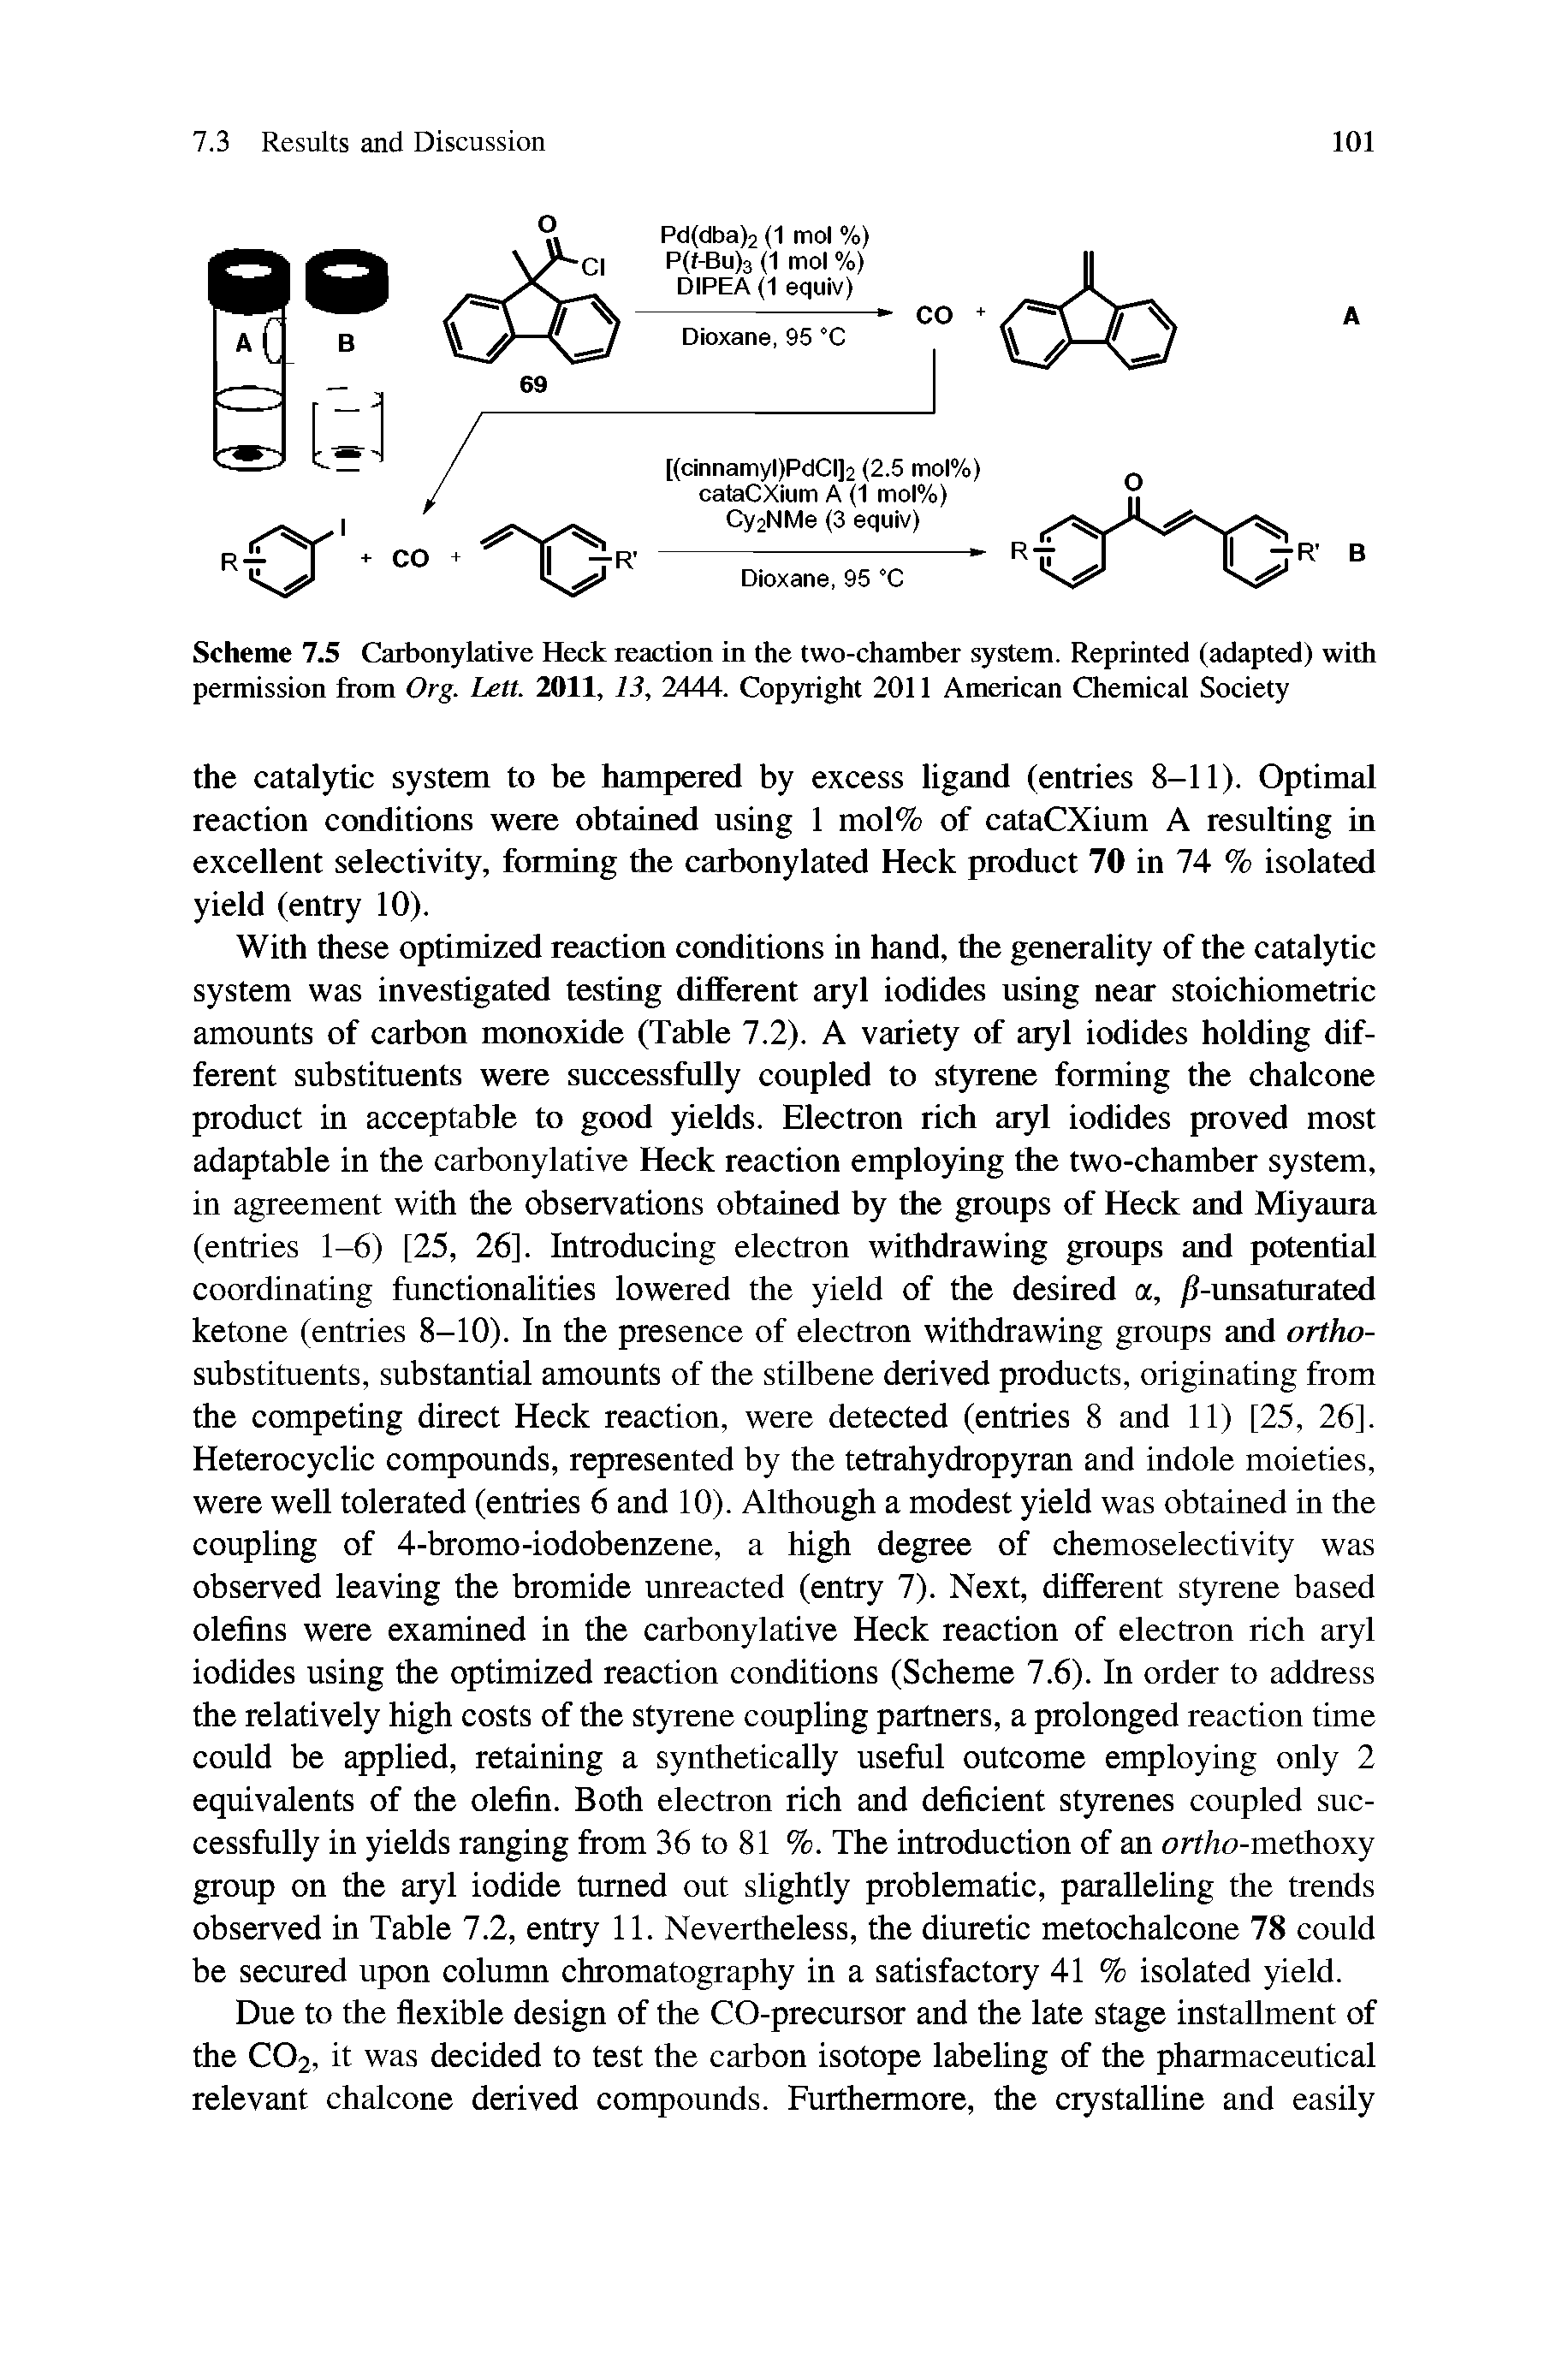 Scheme 7.5 Carbonylative Heck reaction in the two-chamber system. Reprinted (adapted) with permission from Org. Lett. 2011, 13, 2444. Copyright 2011 American (Themical Society...